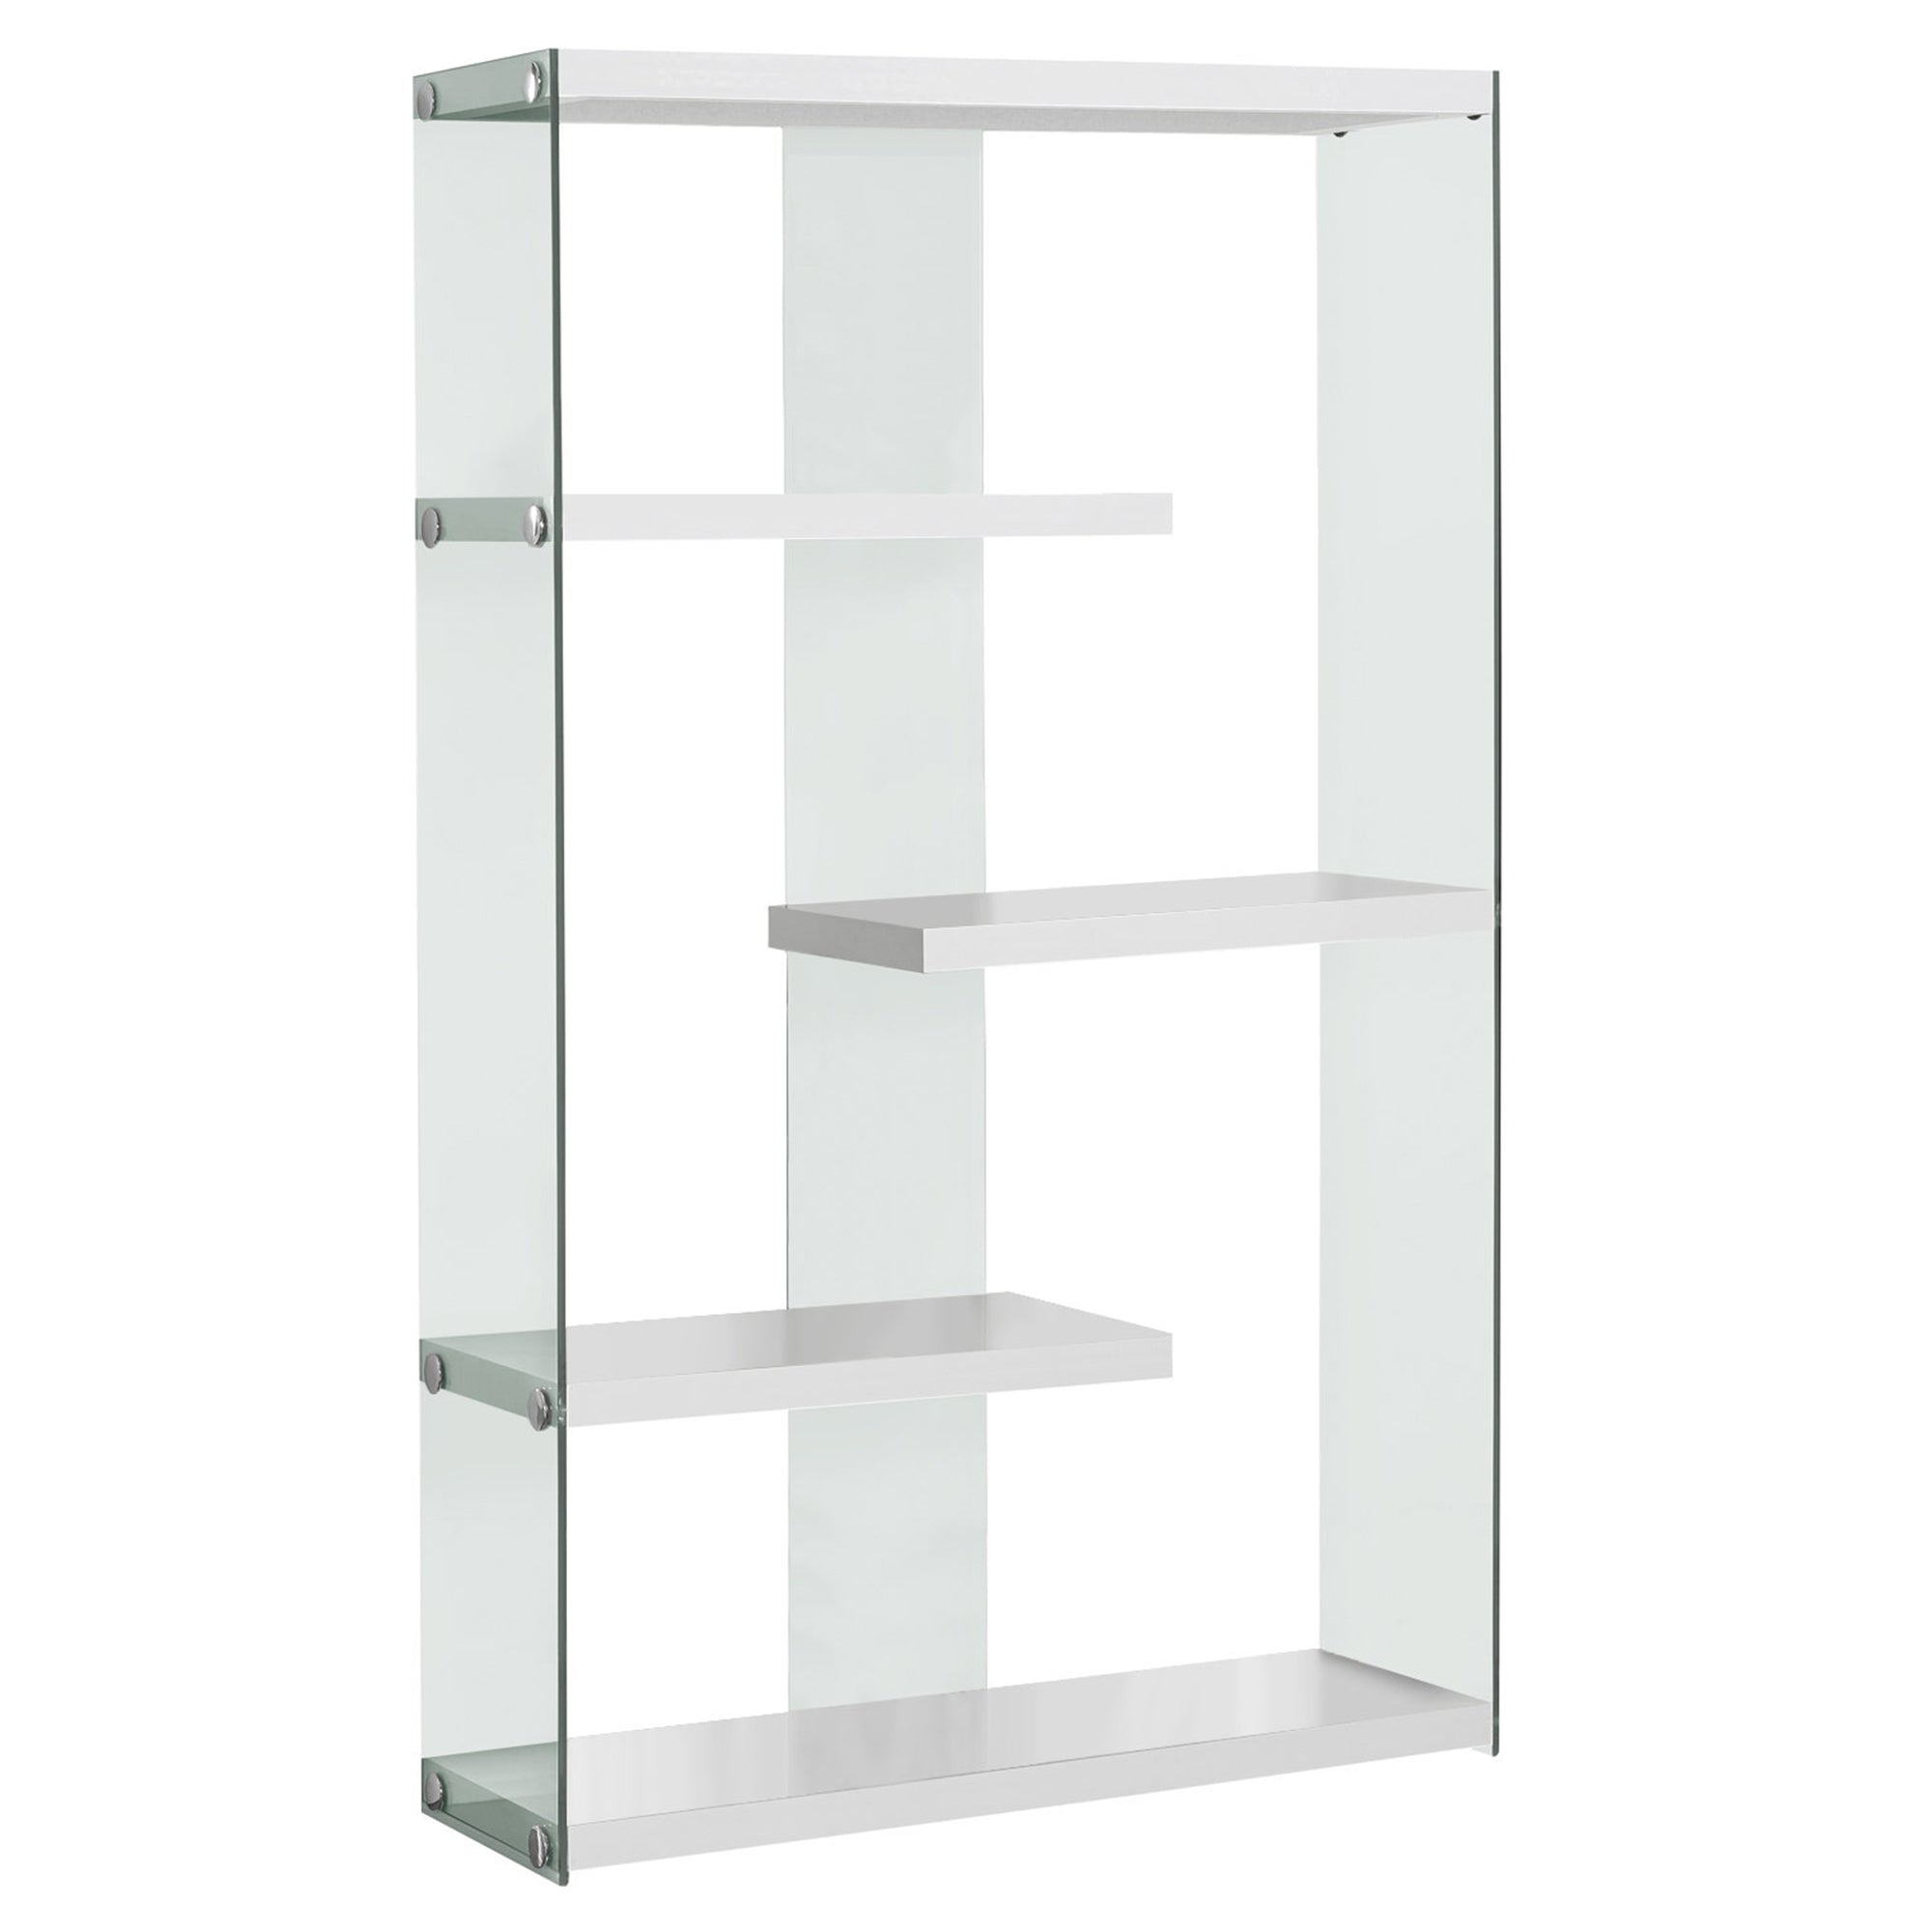 MN-173290    Bookshelf, Bookcase, Etagere, 5 Tier, Office, Bedroom, 60"H, Tempered Glass, Laminate, Glossy White, Clear, Contemporary, Modern